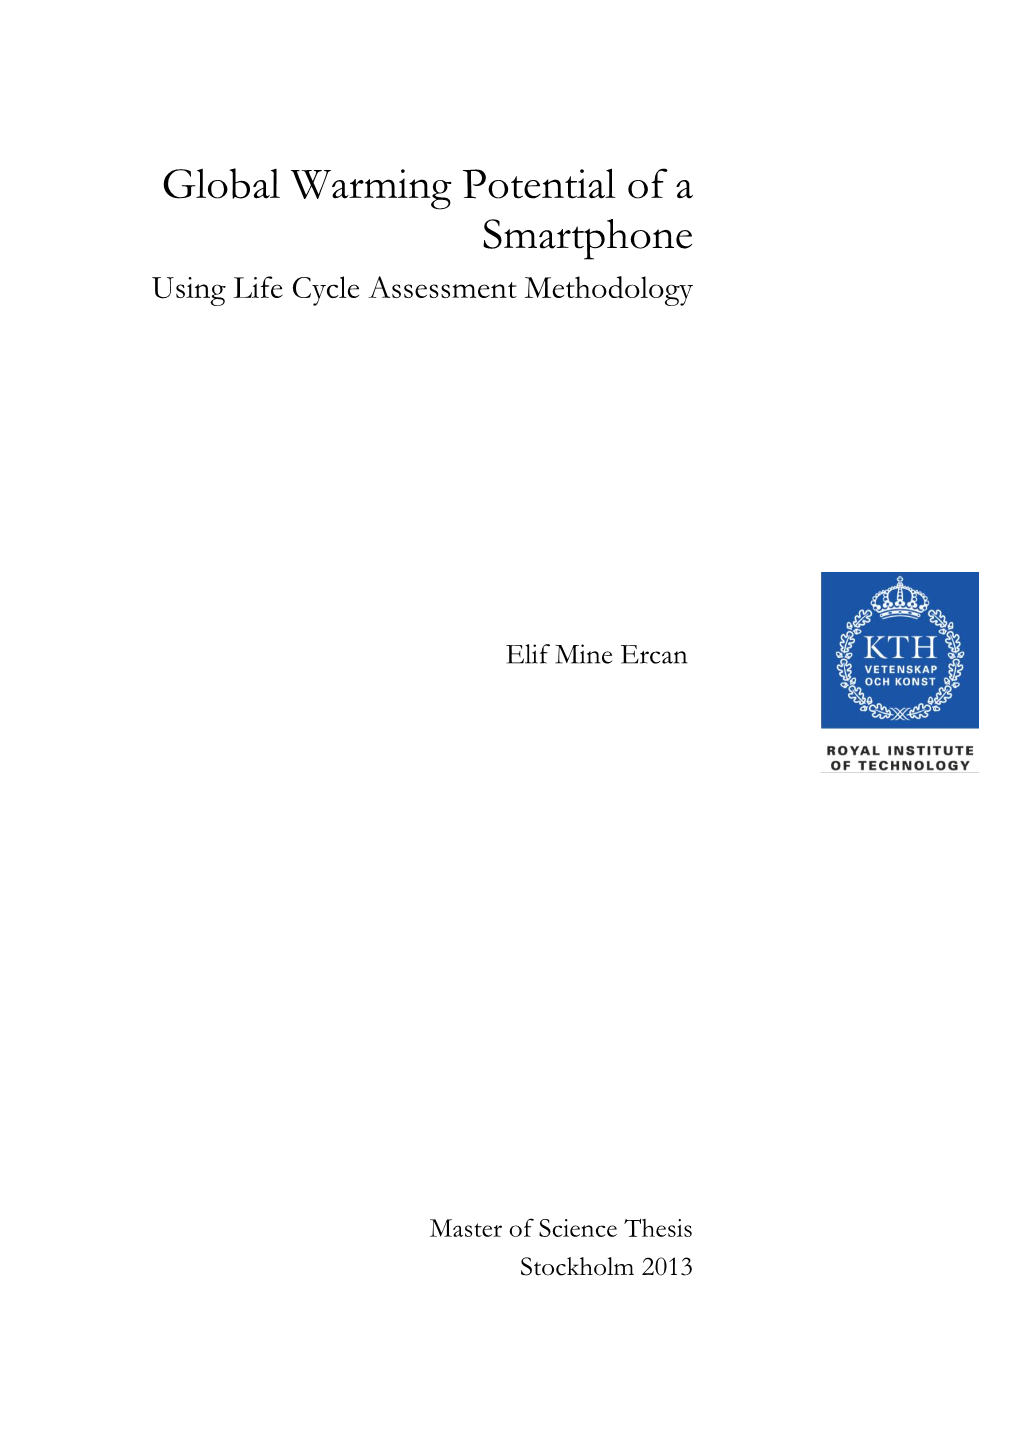 Global Warming Potential of a Smartphone Using Life Cycle Assessment Methodology